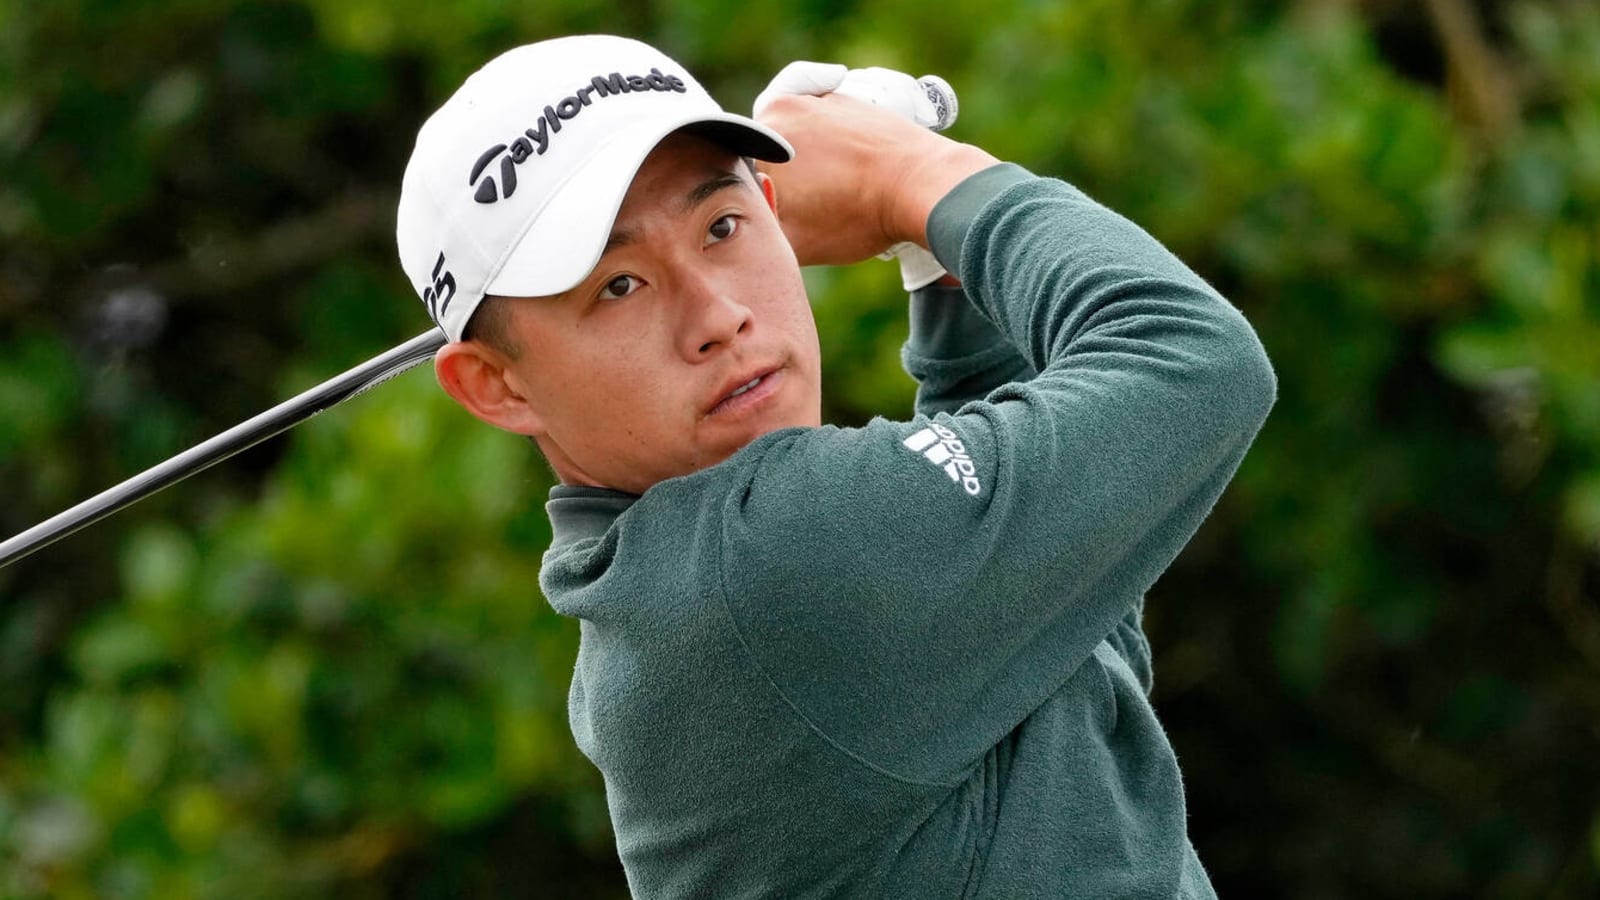 Collin Morikawa had near disaster with his golf clubs at airport